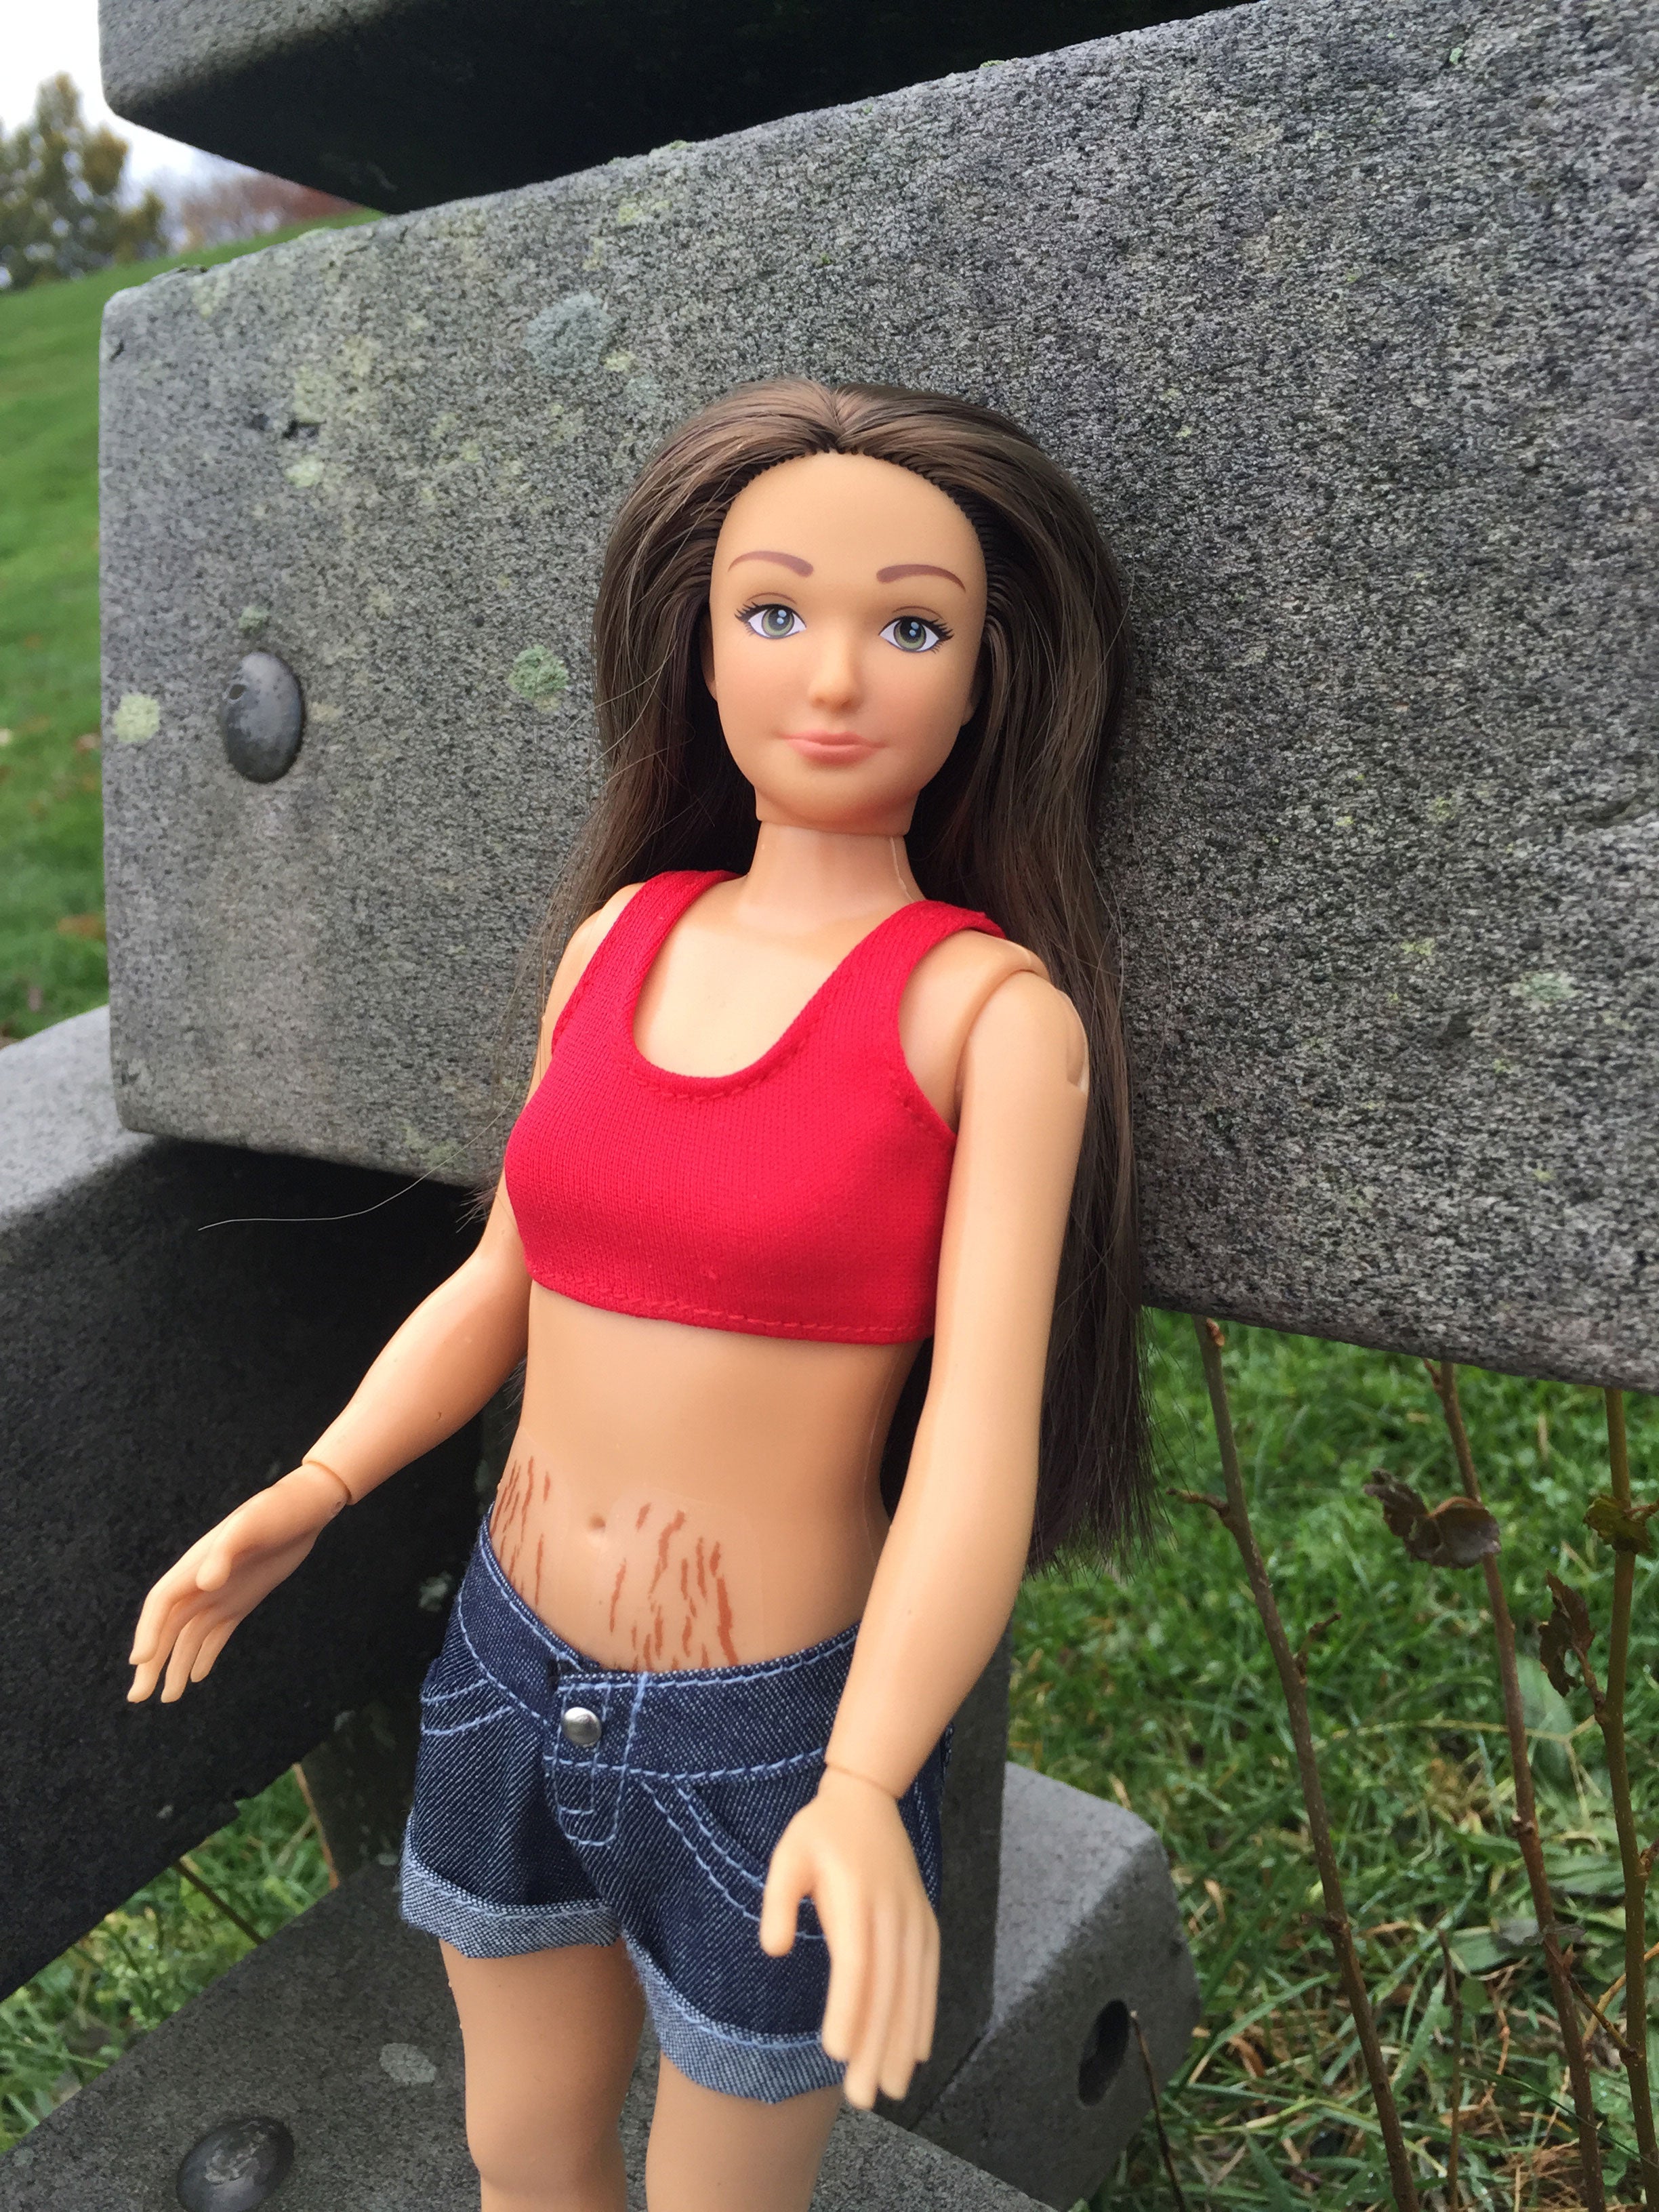 cirkulation Betjene fængsel Normal Barbie': Lammily, the 'realistic' doll with stretch marks, acne, and  grass stains on her legs | The Independent | The Independent